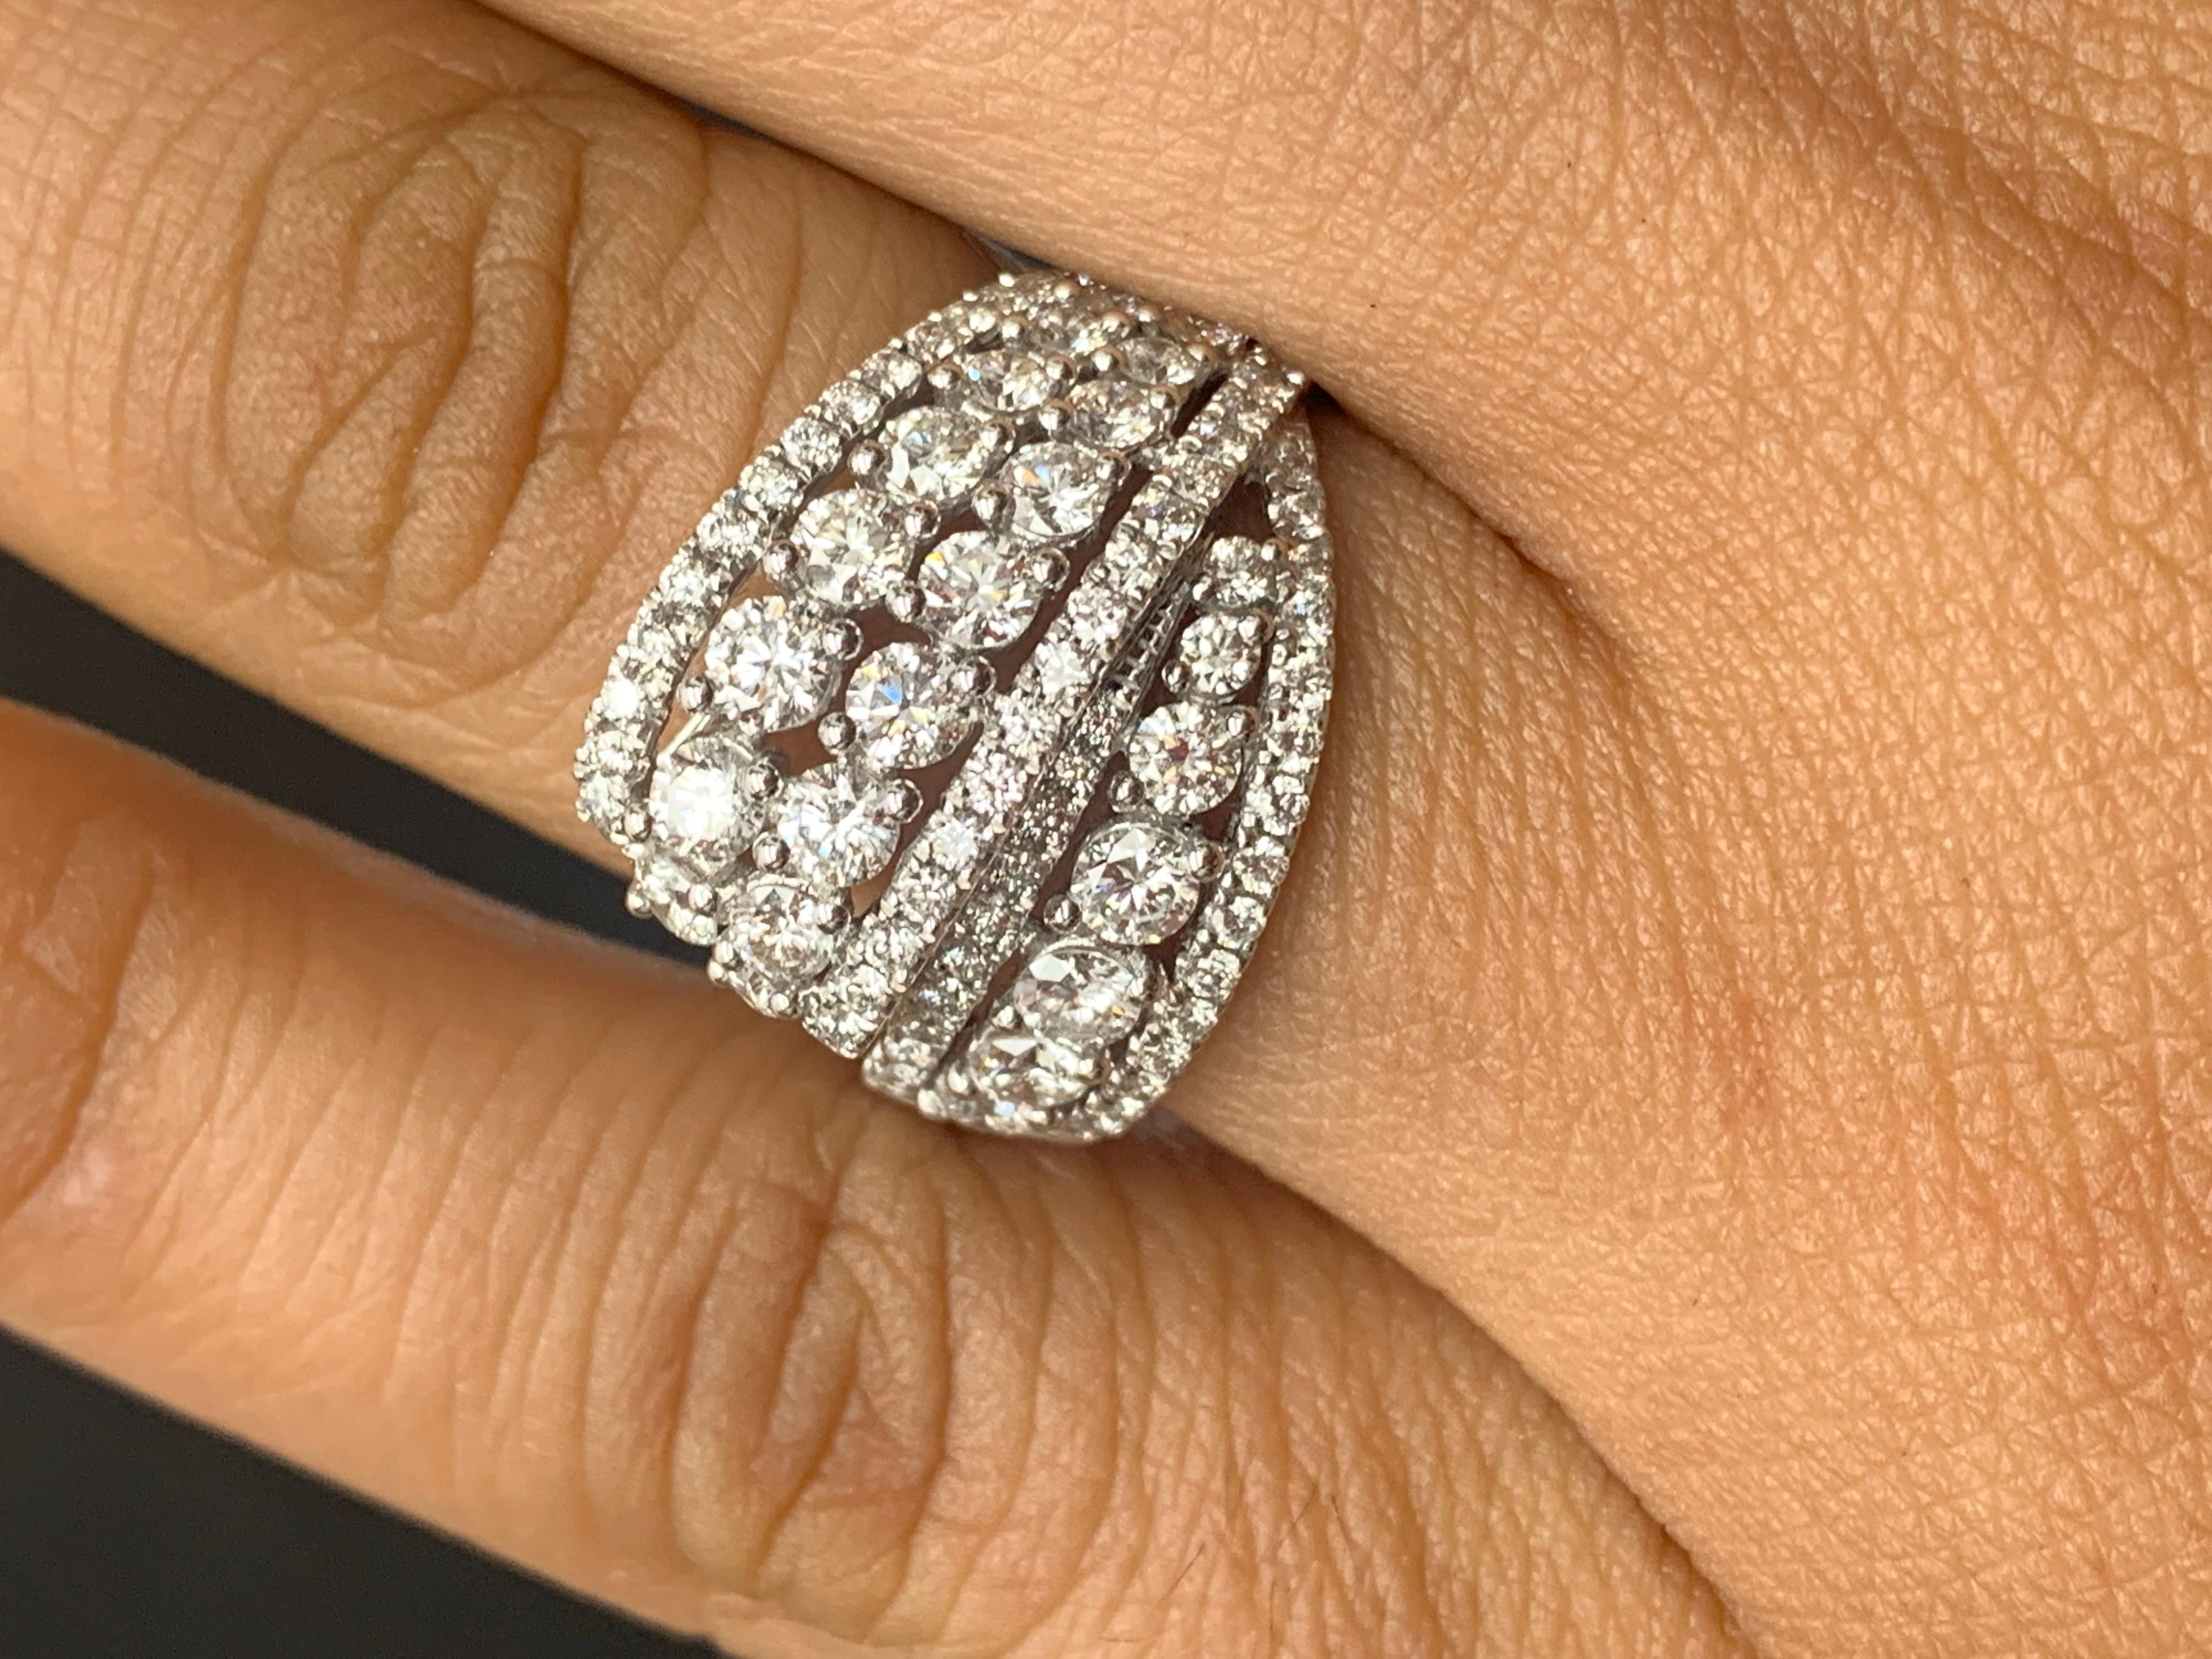 A beautiful and unique cocktail ring showcasing 94 brilliant round cut diamonds weighing 1.93 carats. Set in a cluster design setting. Made in 18k white gold 

Style available in different price ranges. Prices are based on diamond size and